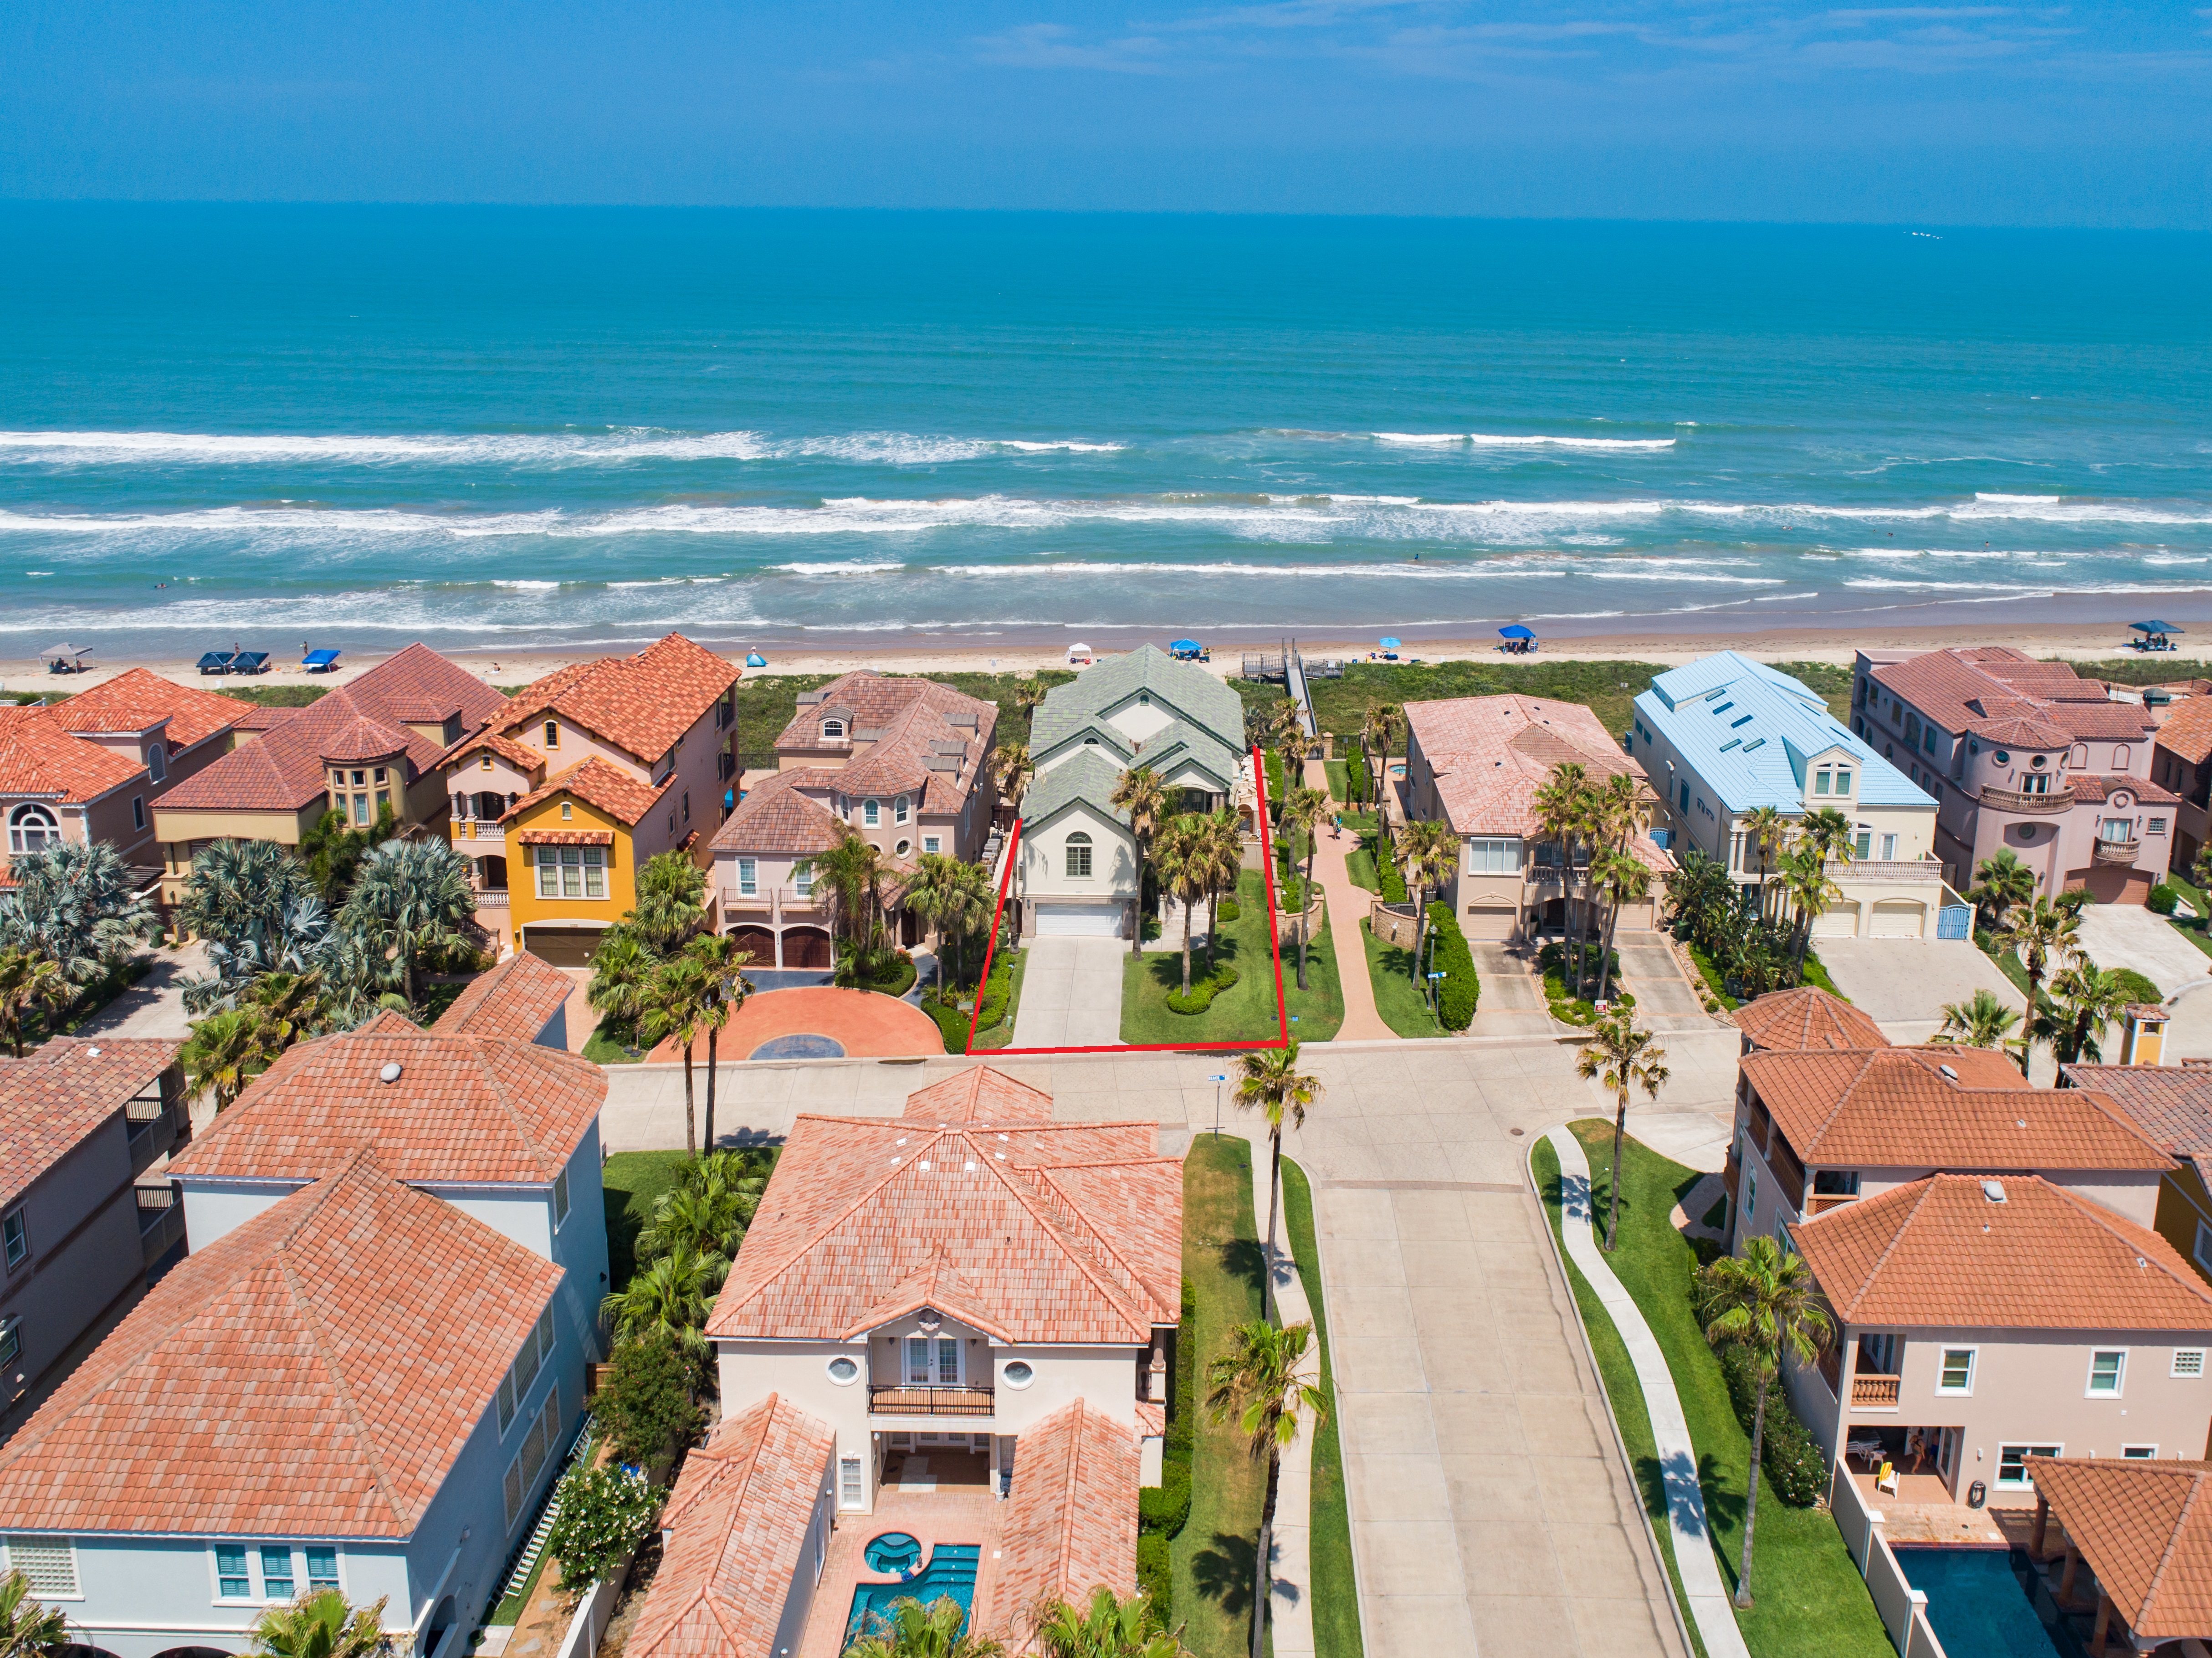 6500 Beach Drive: 5 Bedroom Pool Private Beachfront Vacation Home 6500 Beach Drive South Padre Island